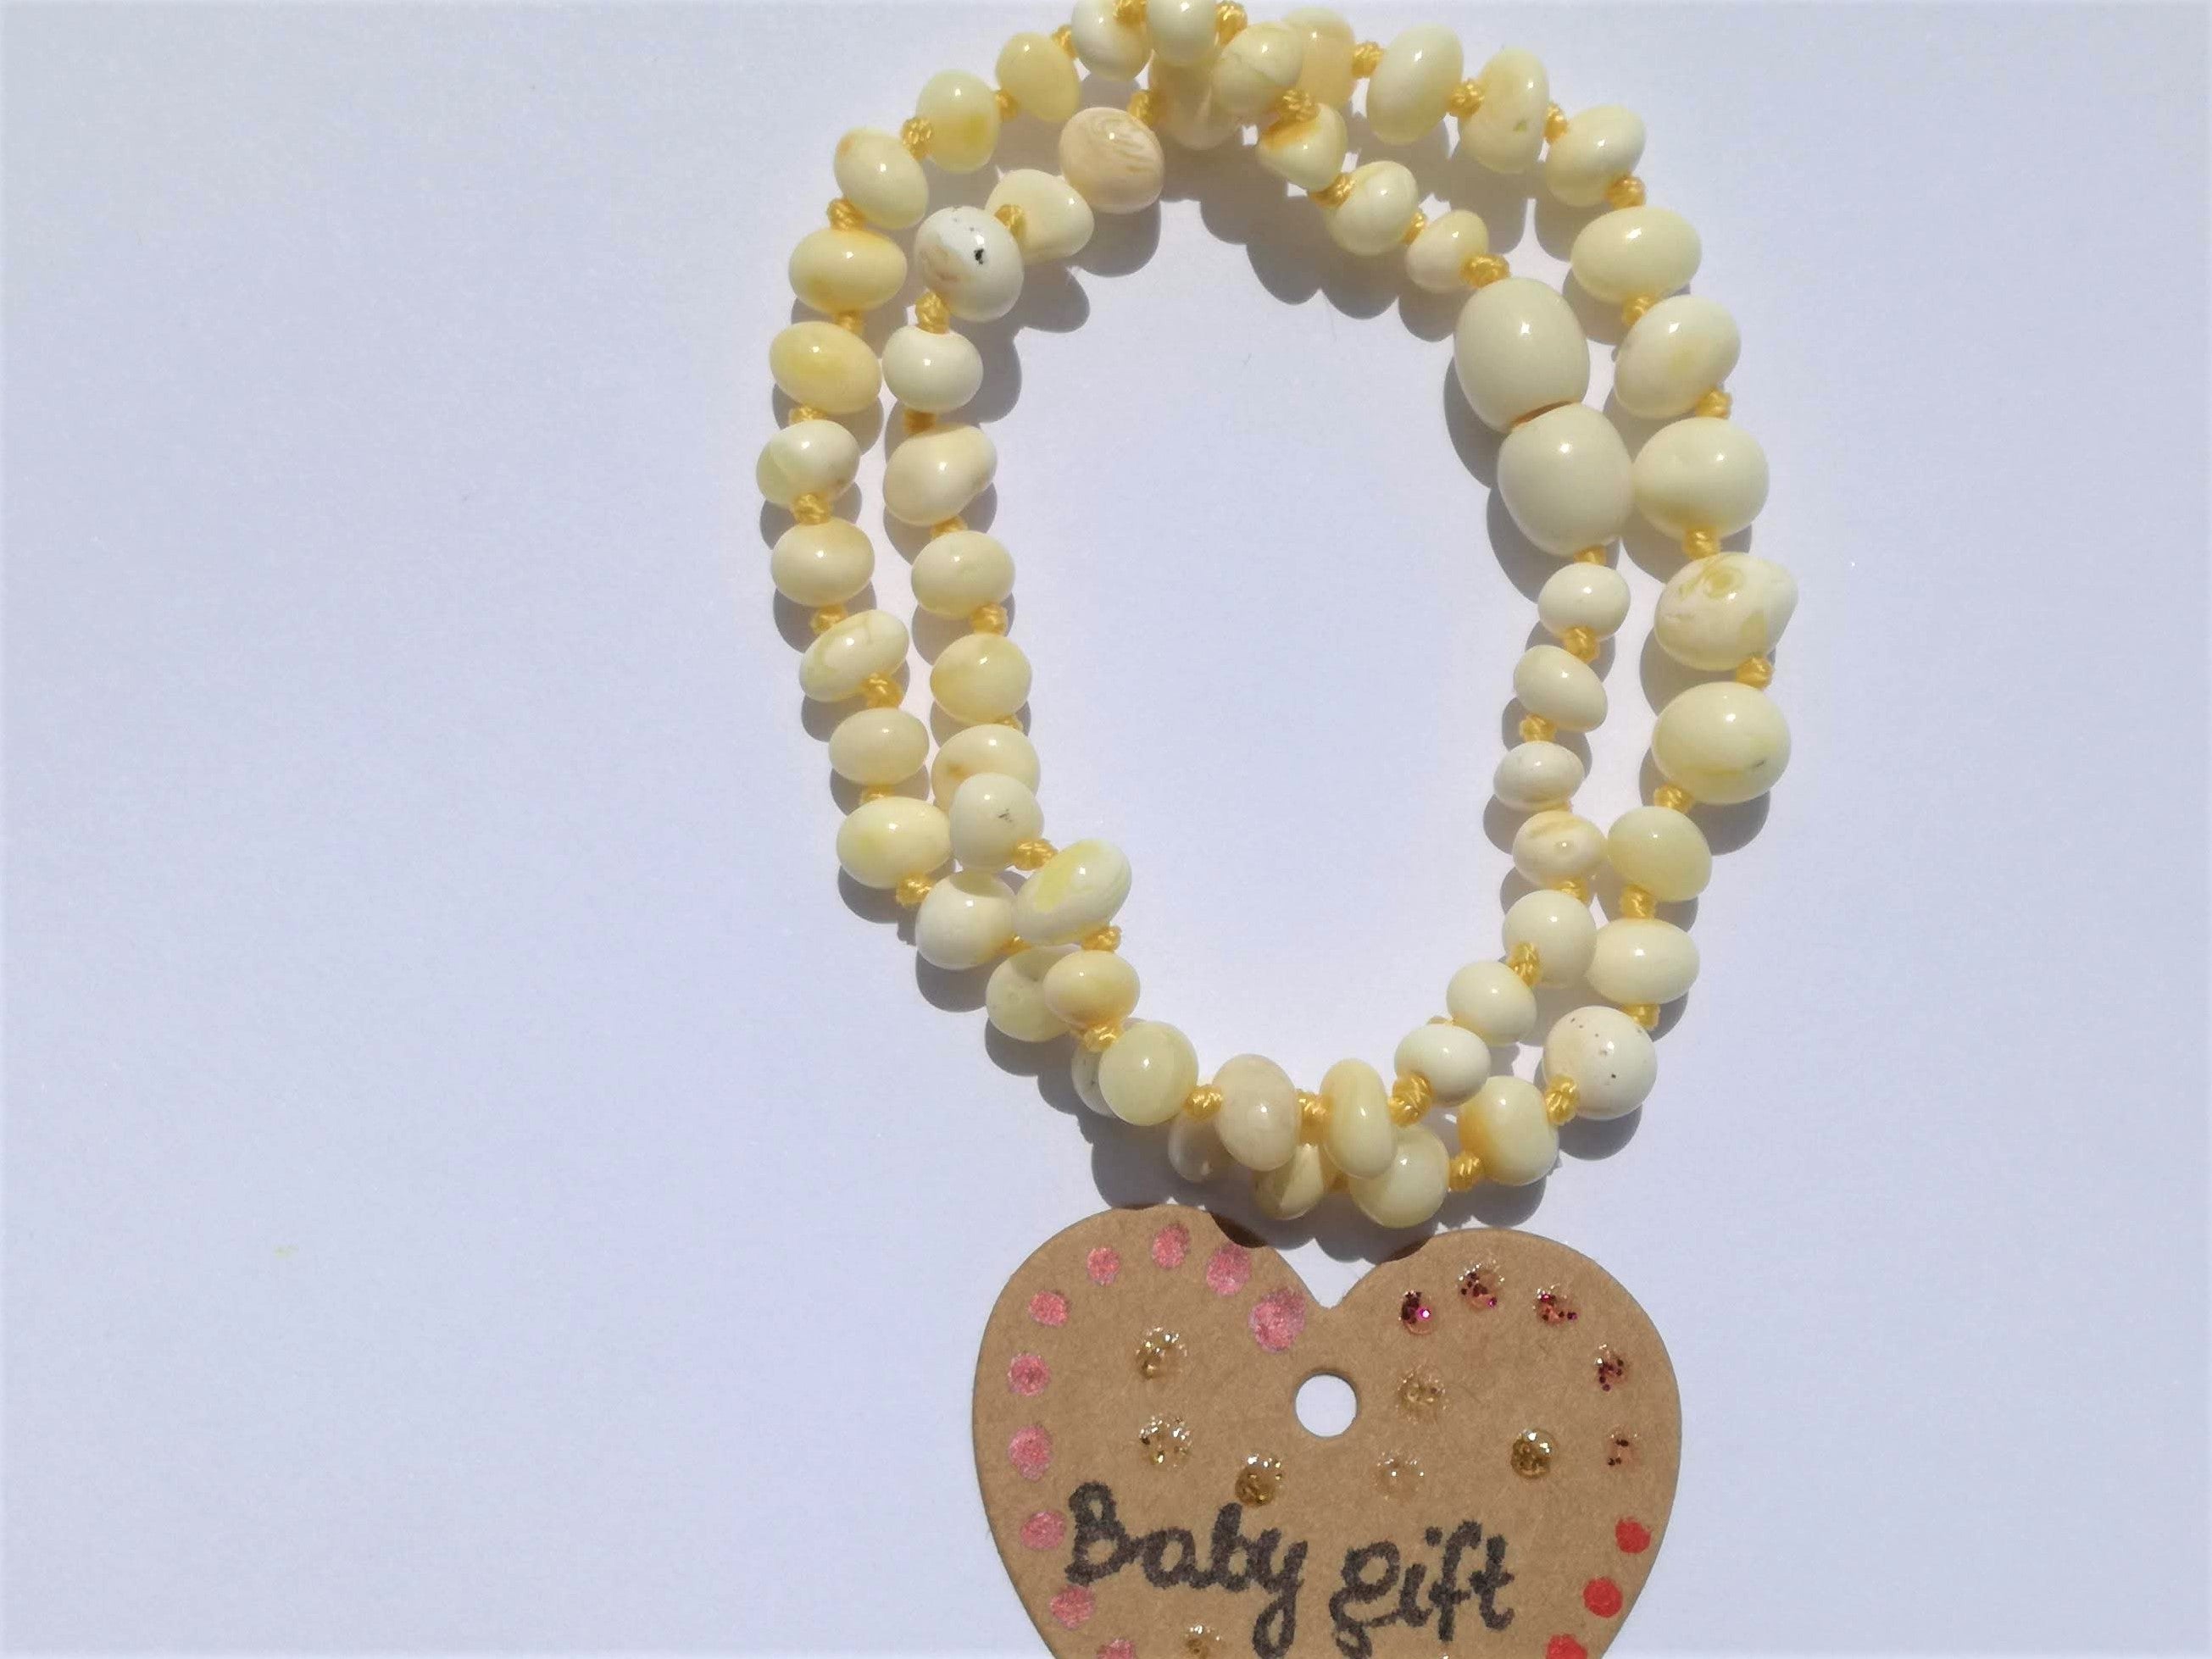 amber teething necklace, white polished beads, premium product, limited edition, plastic screw clasp, healing, succinic acid, genuine baltic amber, safe for babies and nursing mums, made in poland